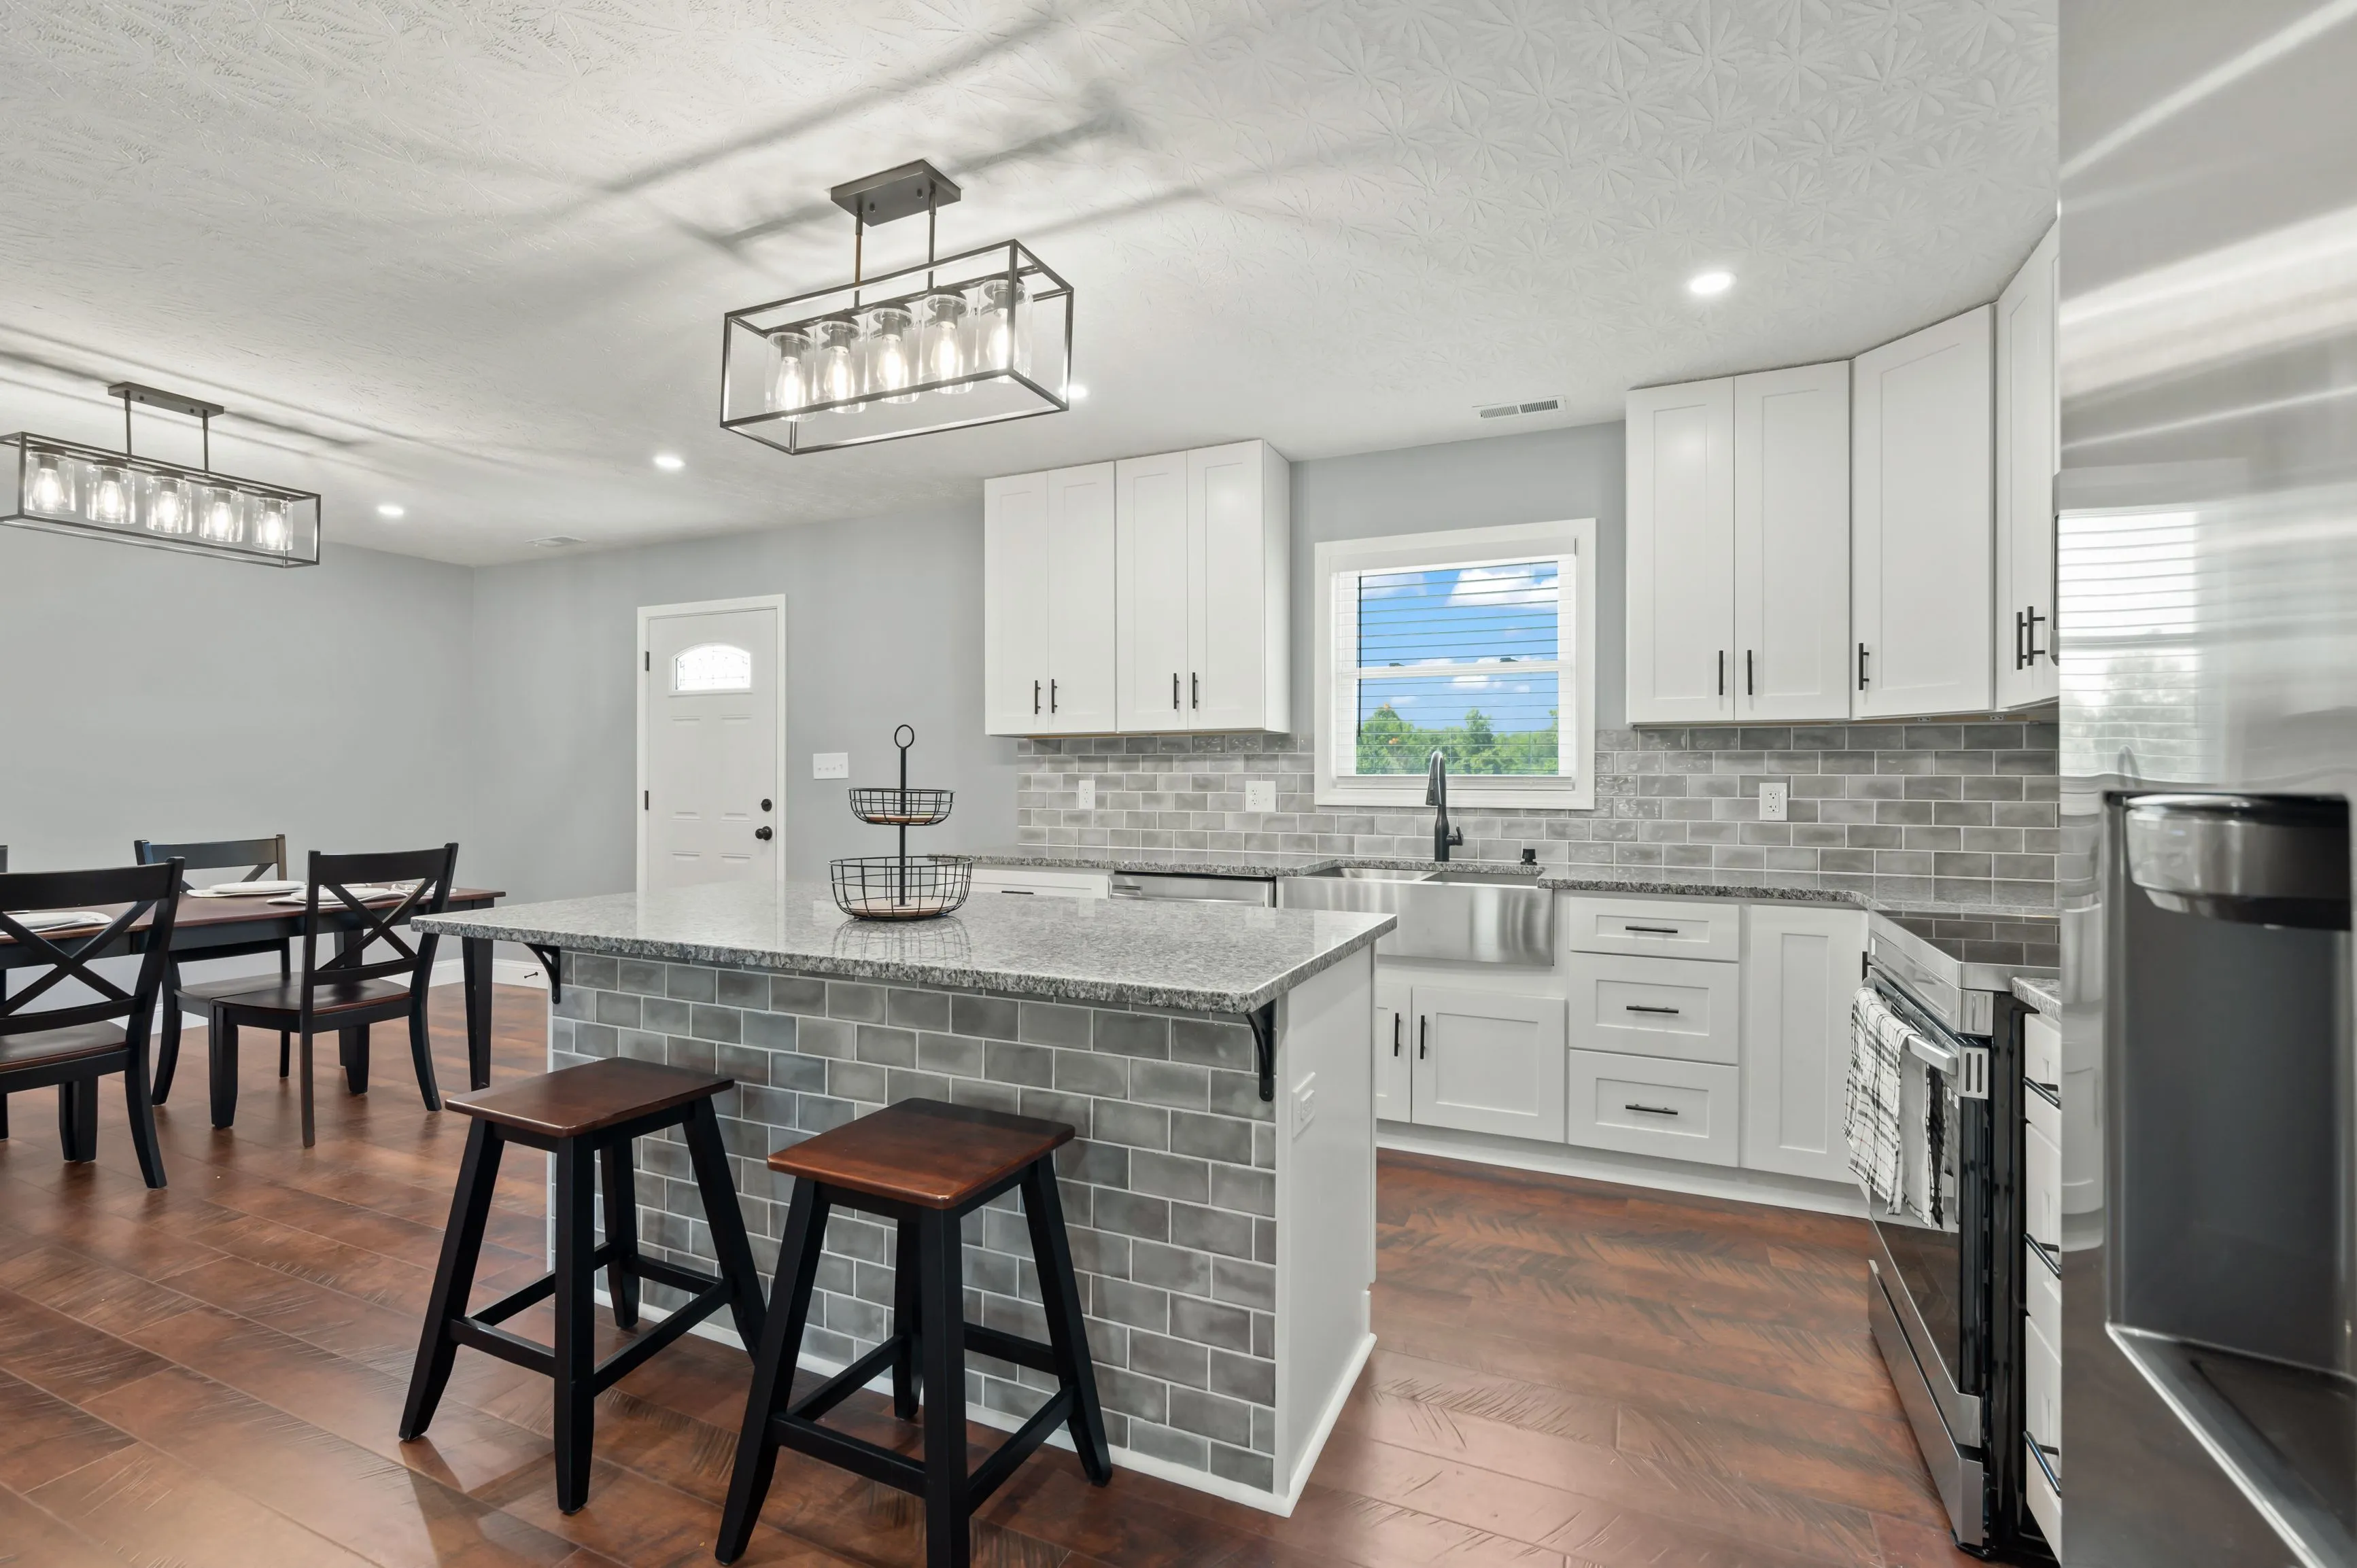 Modern kitchen interior with granite countertops, white cabinetry, stainless steel appliances, and a dining area with stylish lighting fixtures.